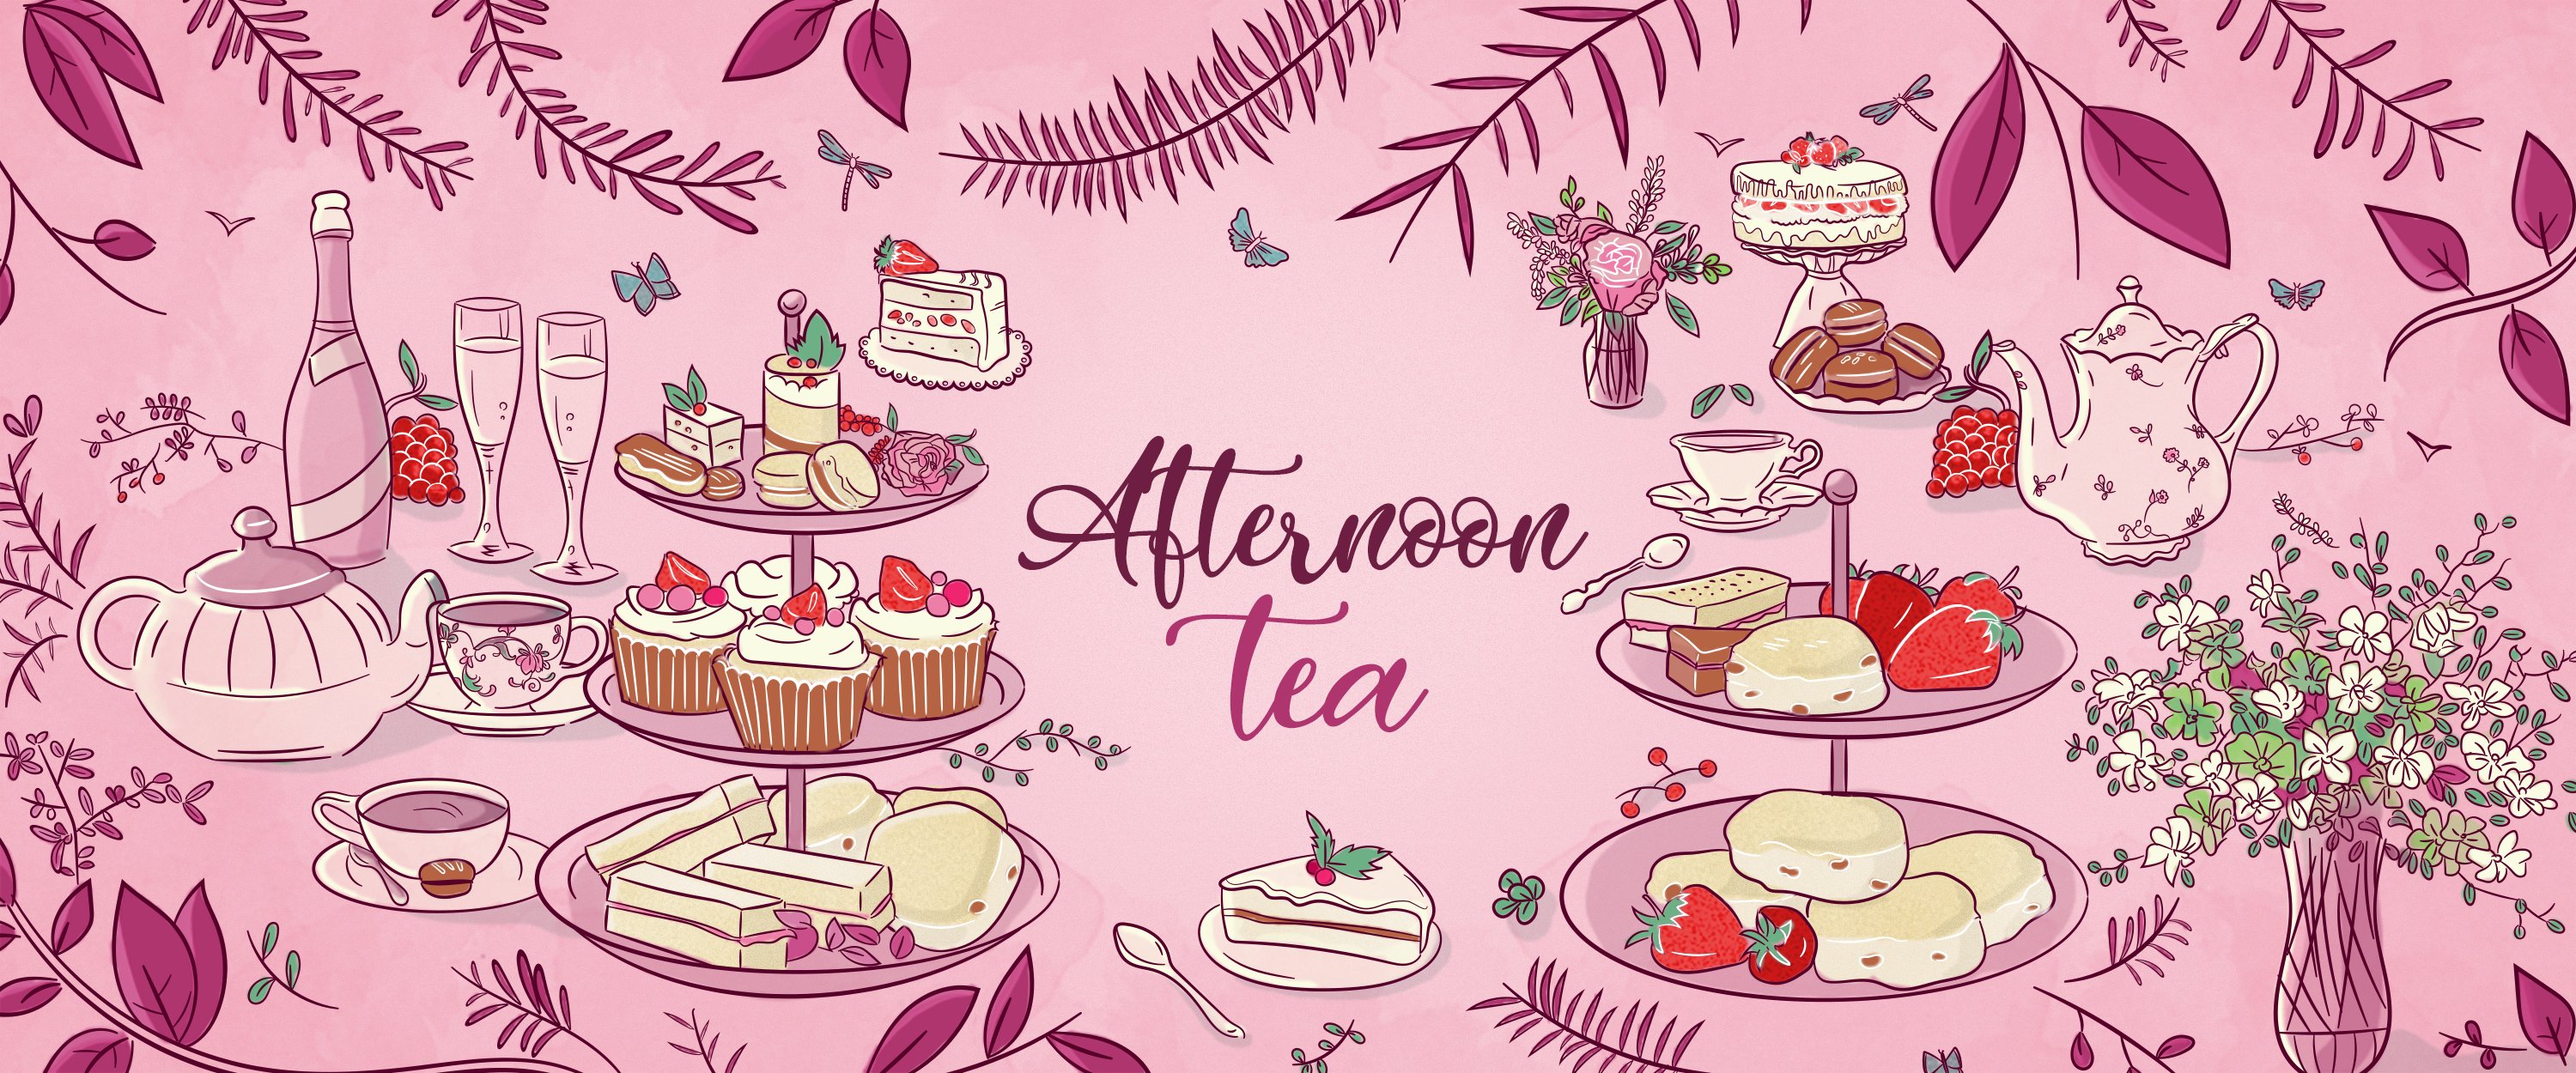 Afternoon Tea campaign homepage banner